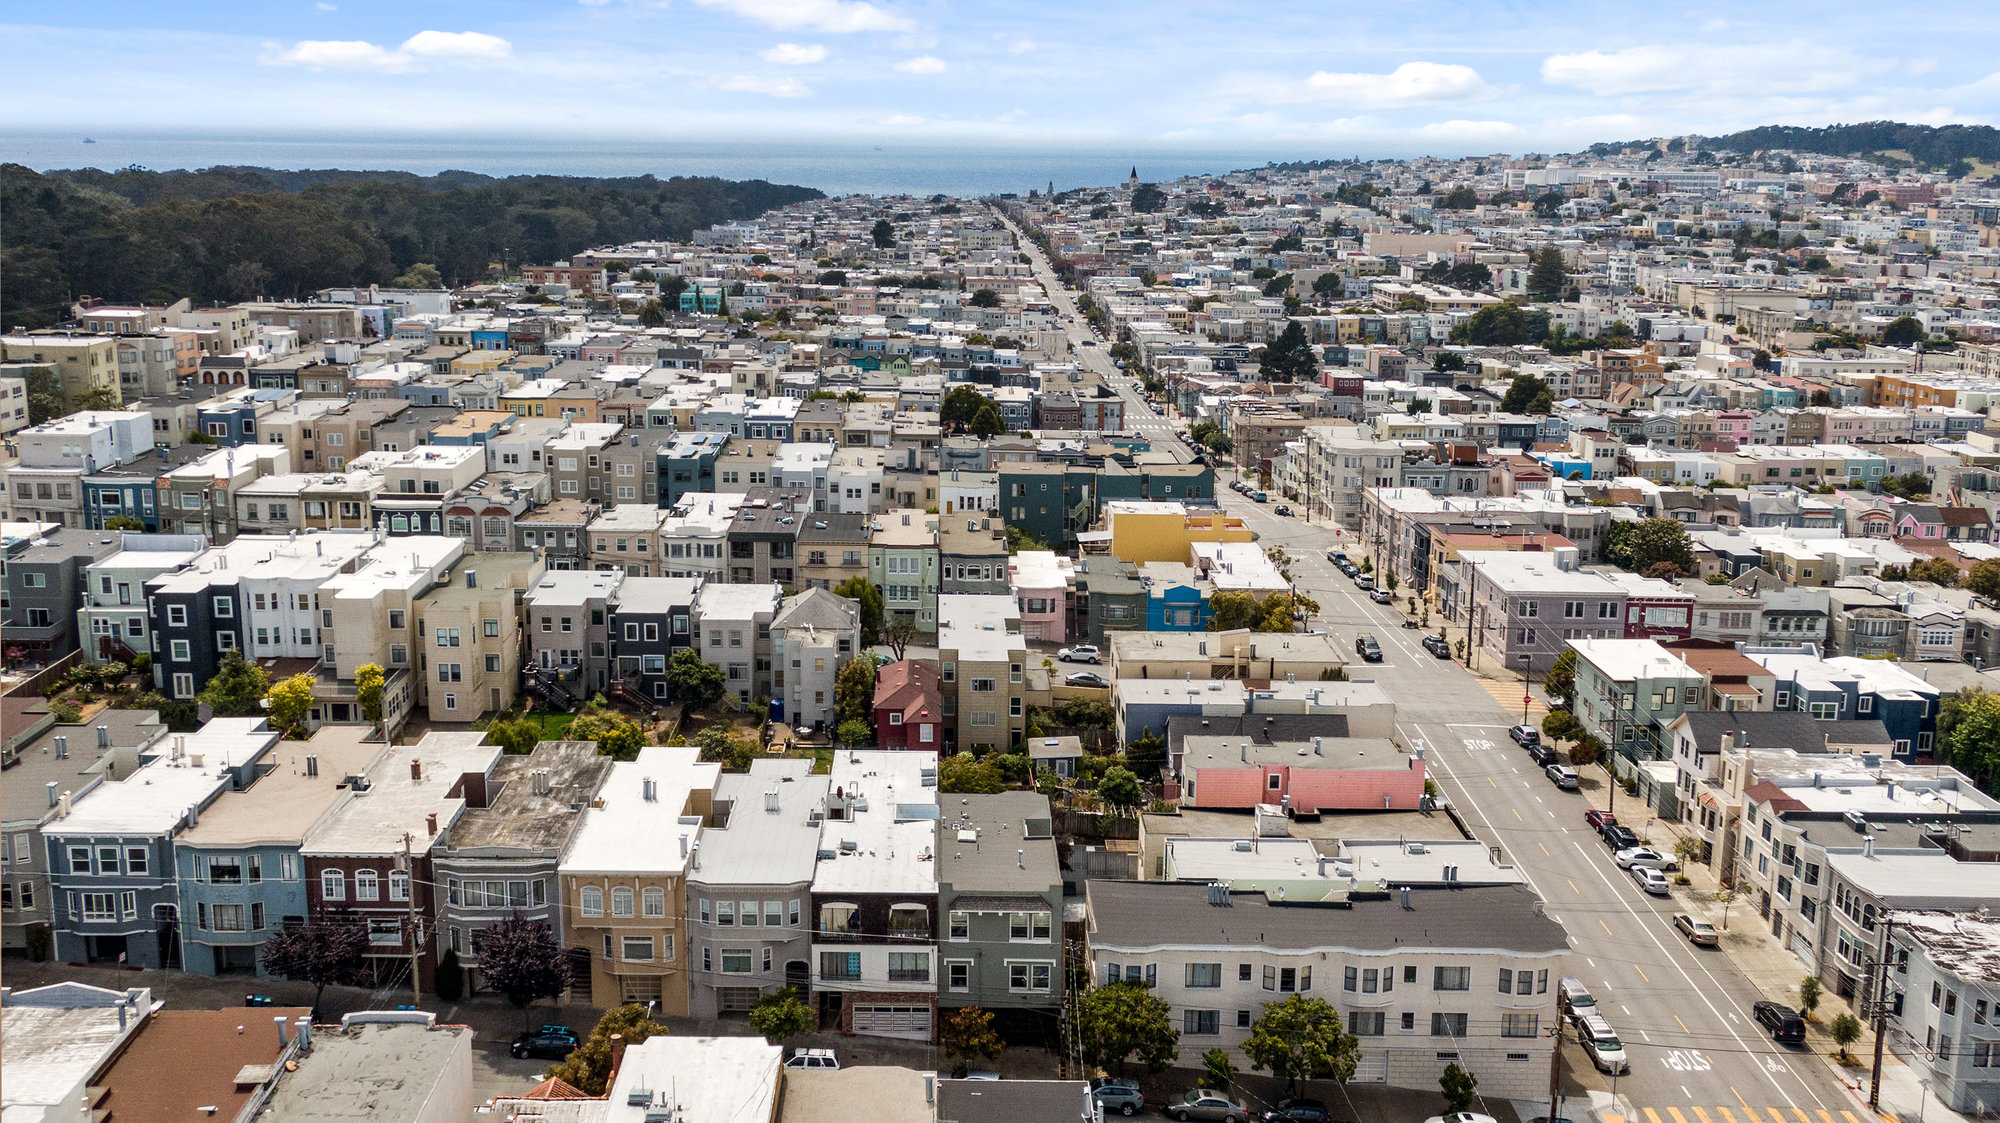 Property Photo: Aerial view of 719 18th Avenue, showing the proximity to Ocean Beach and Golden Gate Park